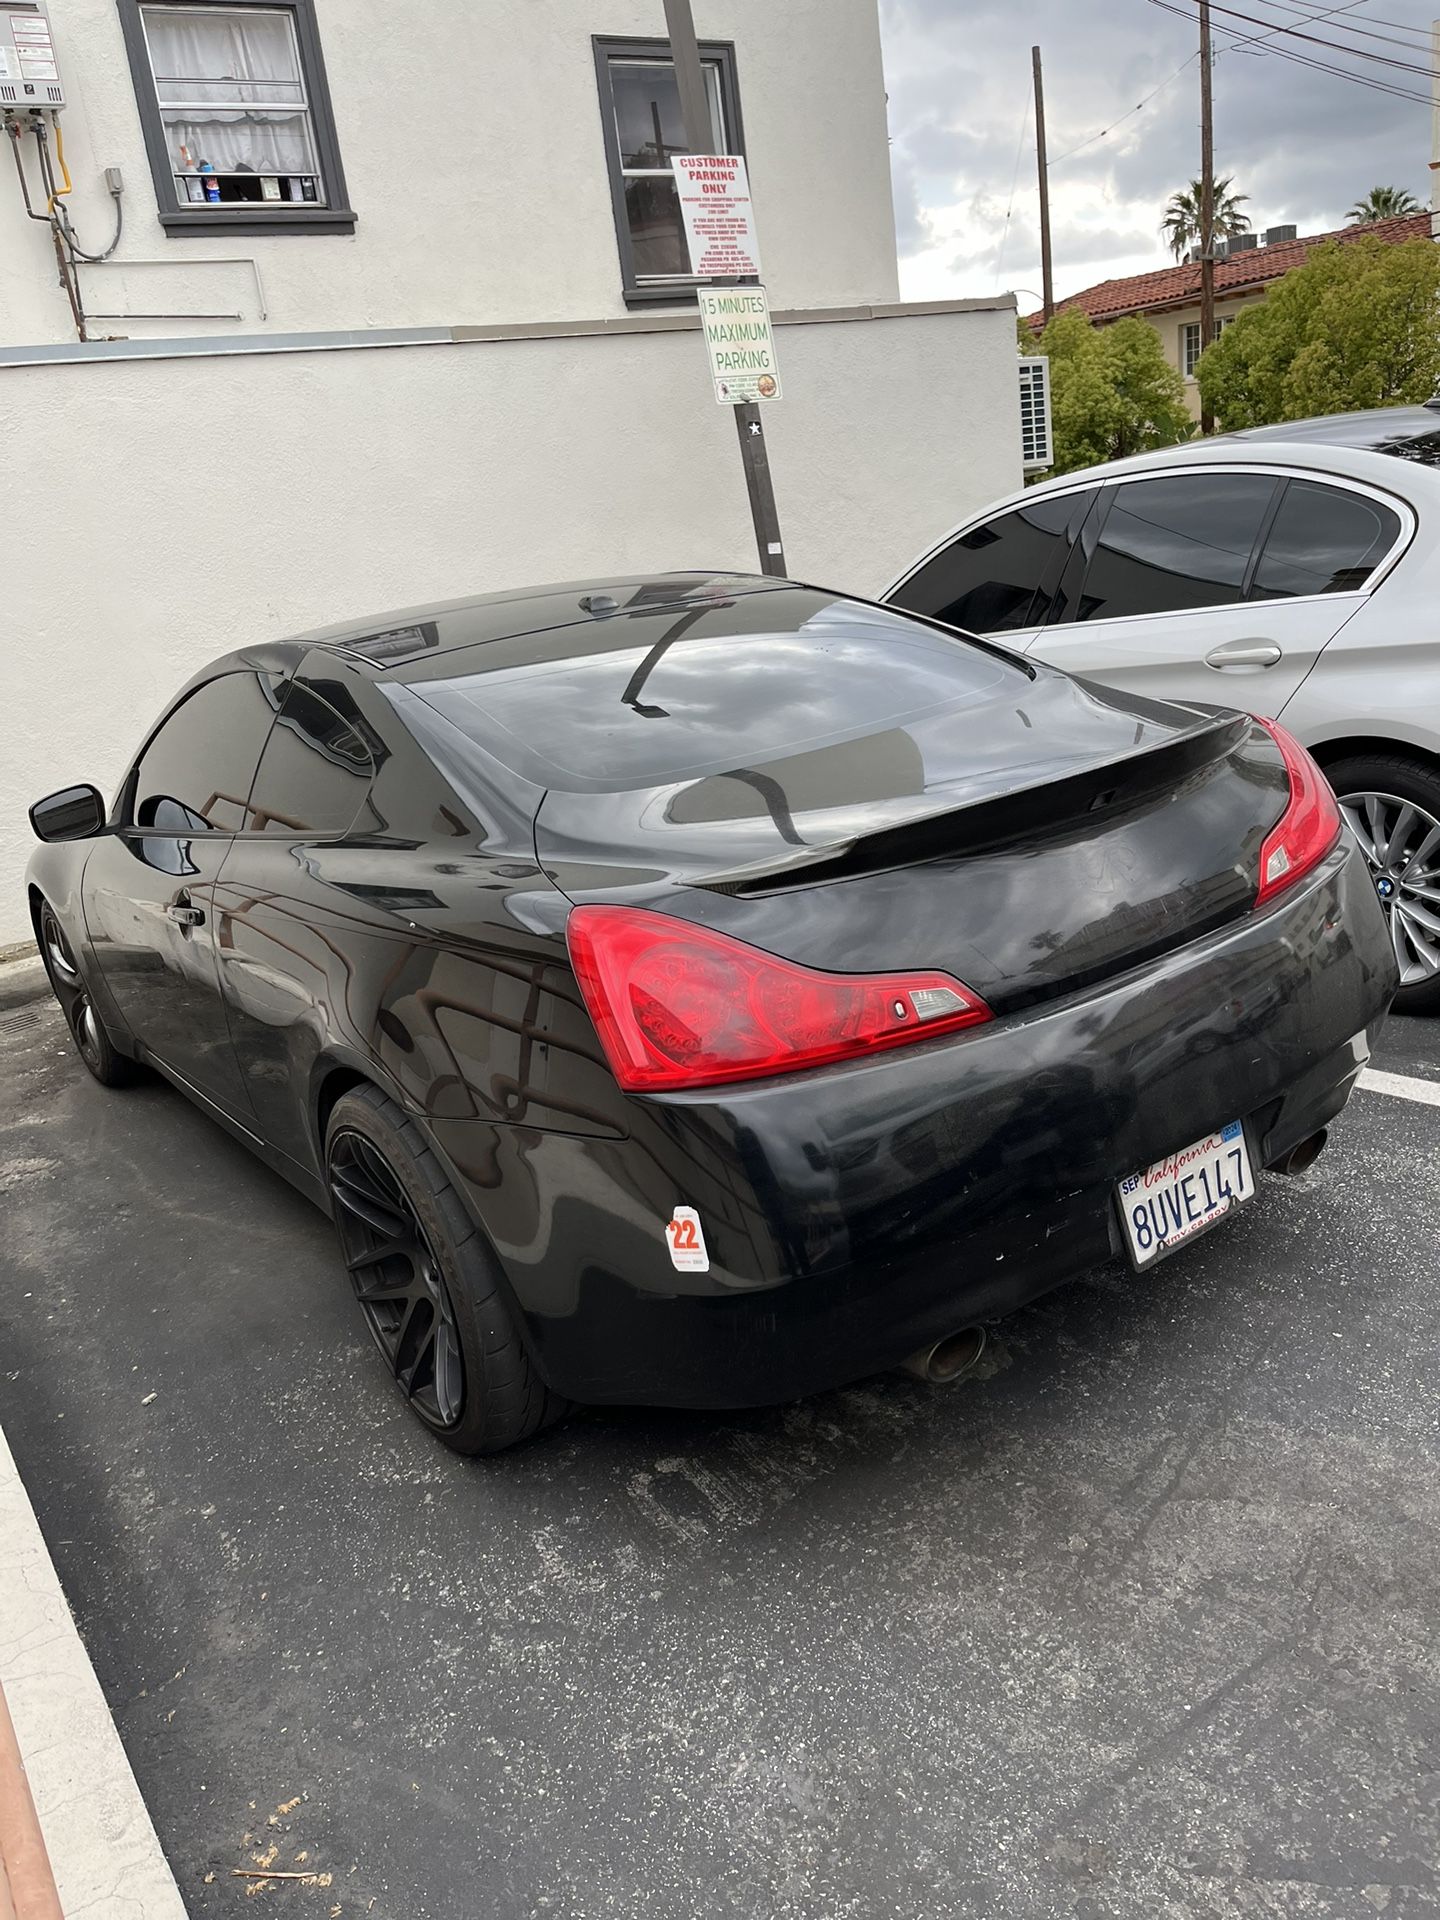 2008 G37 Coupe